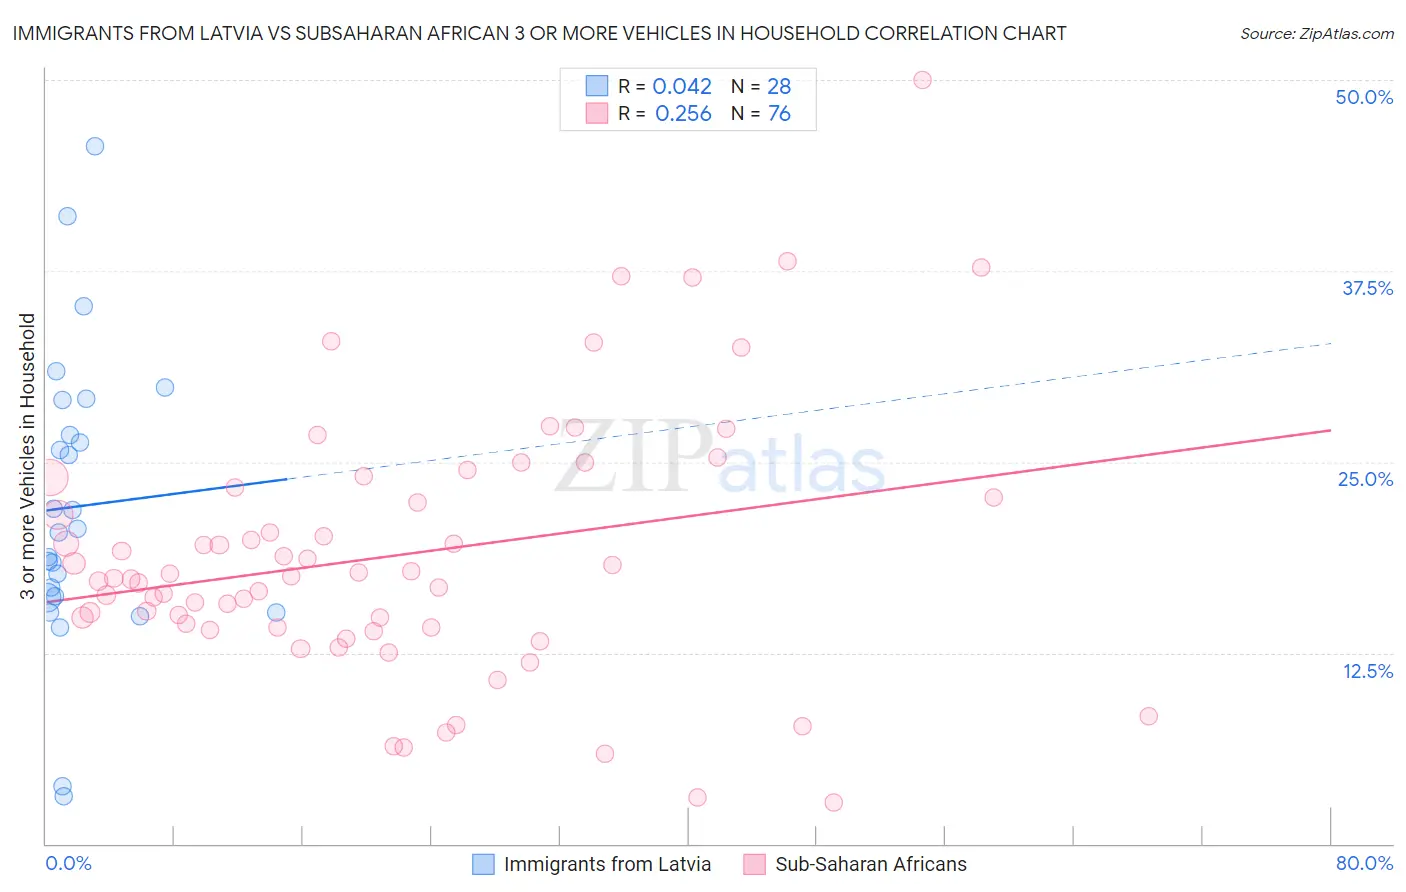 Immigrants from Latvia vs Subsaharan African 3 or more Vehicles in Household